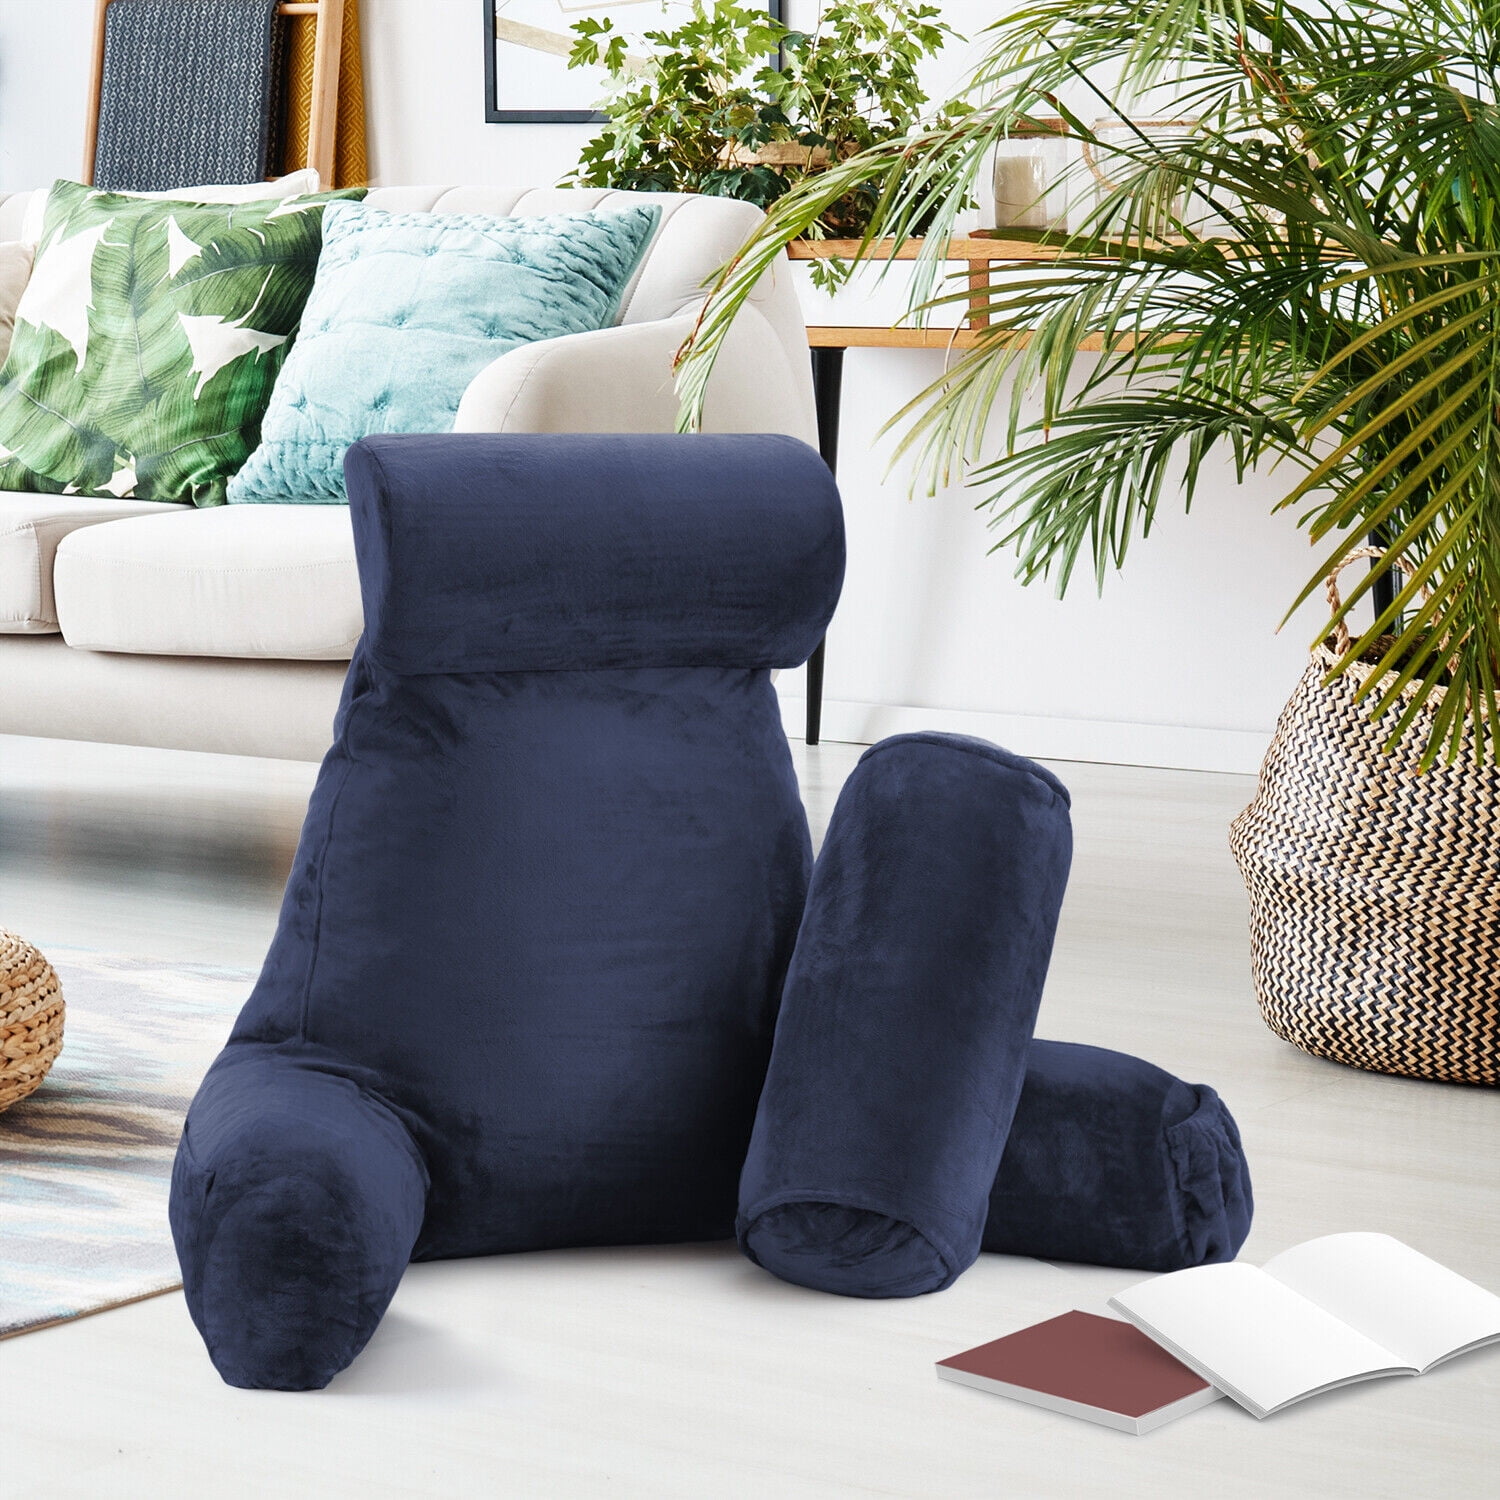  Joyching Backrest Reading Pillows for Sitting in Bed Adults -  Plush Pillow with Shredded Memory Foam Arm Rests Supportive Neck Pillow for  Reading or Watching TV : Home & Kitchen